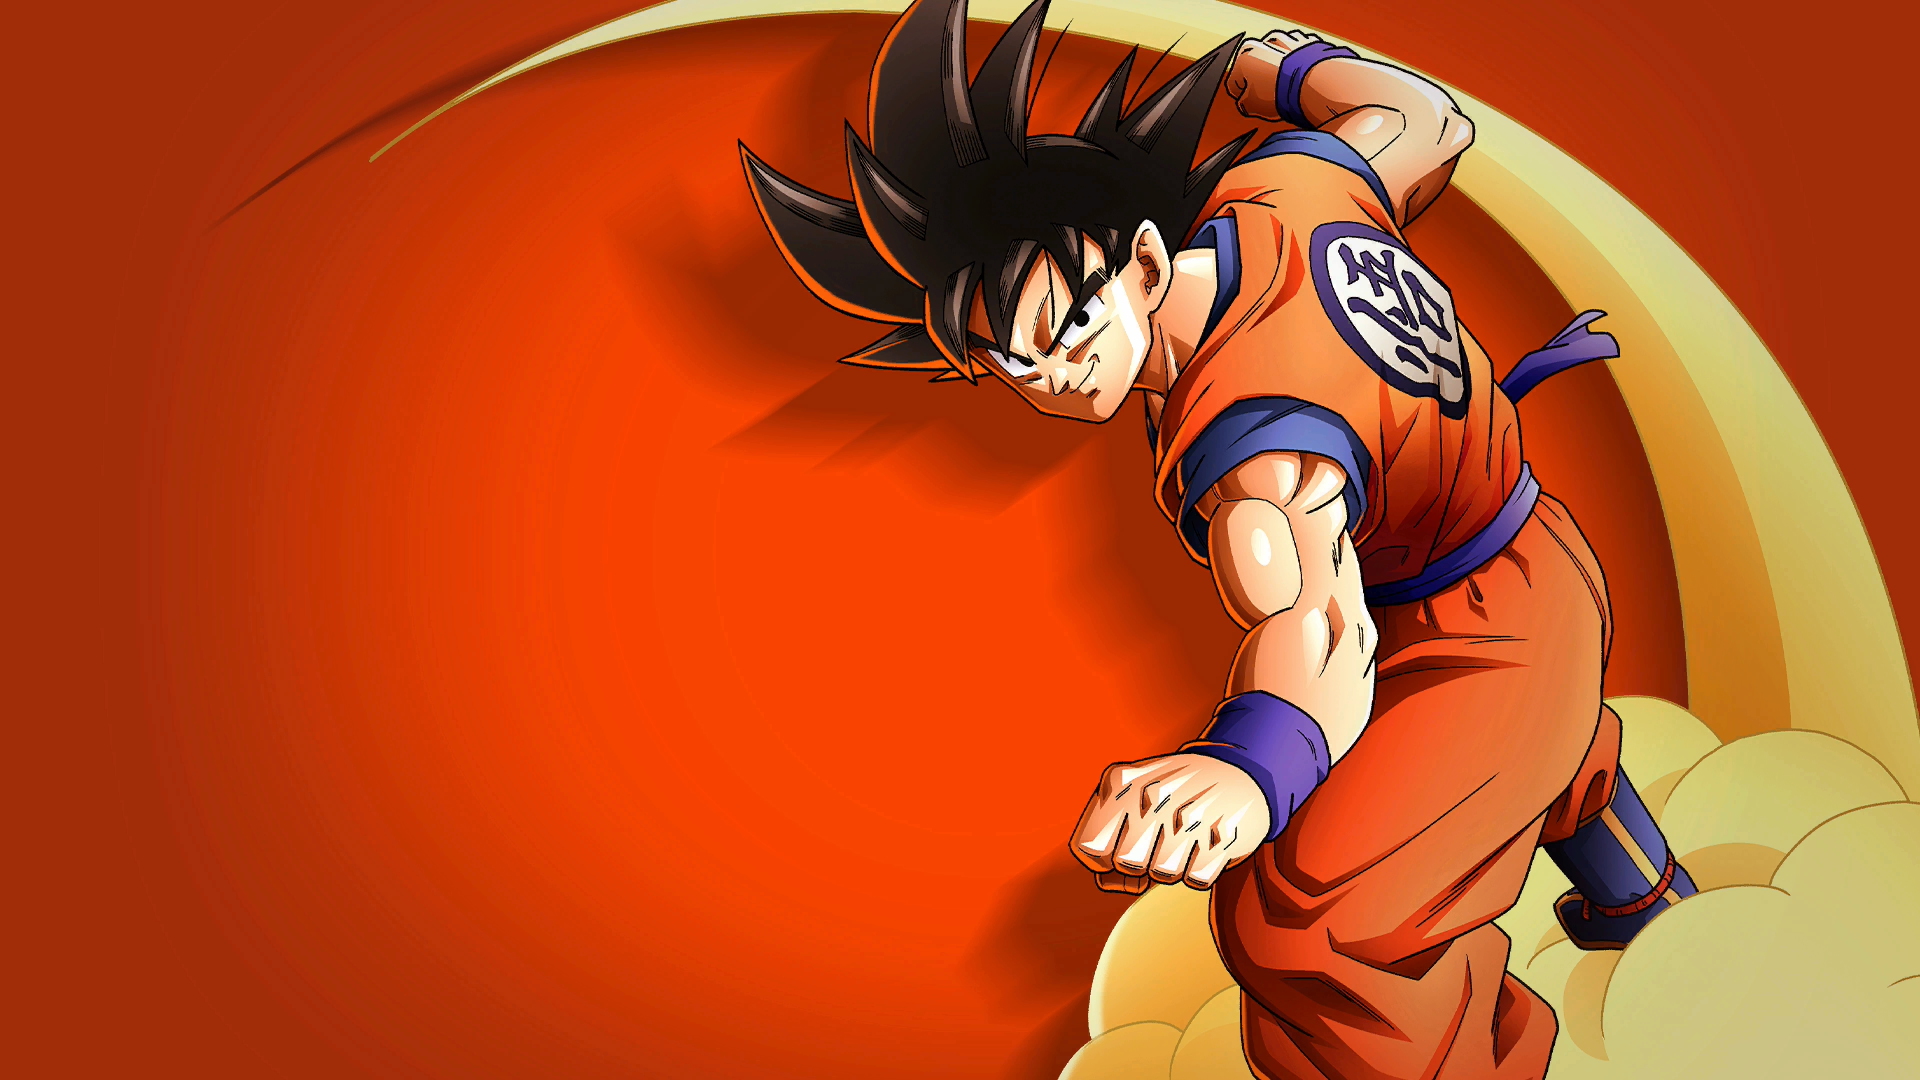 Get Immersed in the World of Dragon Ball Z: Kakarot and Season